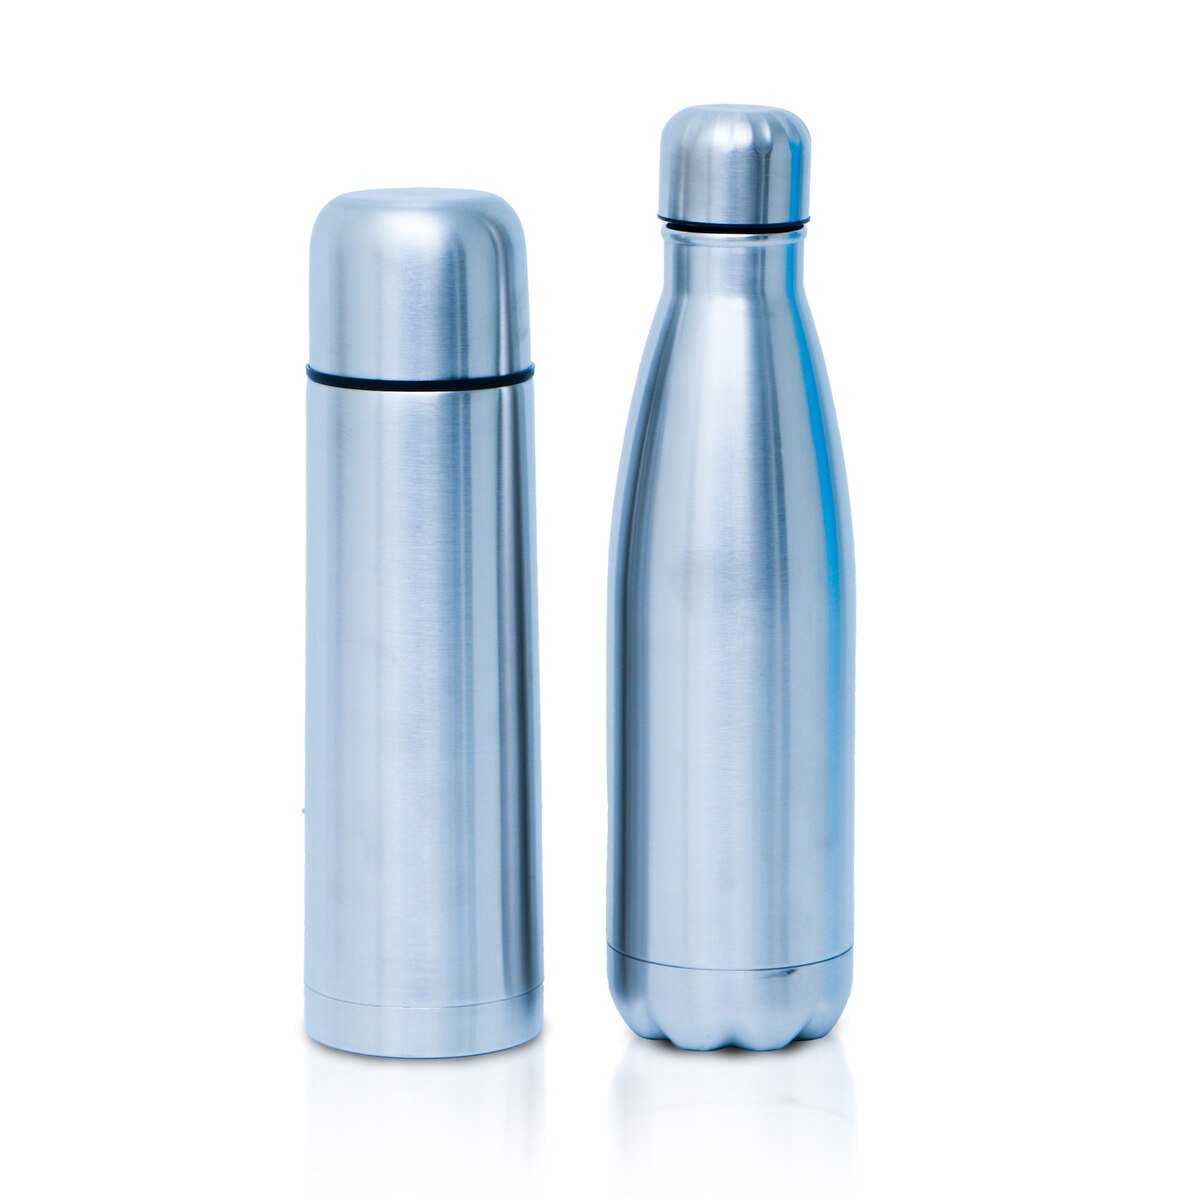 Speed Stainless Steel Flask 500ml + Stainless Steel Vacuum Bottle 500ml Assorted Color